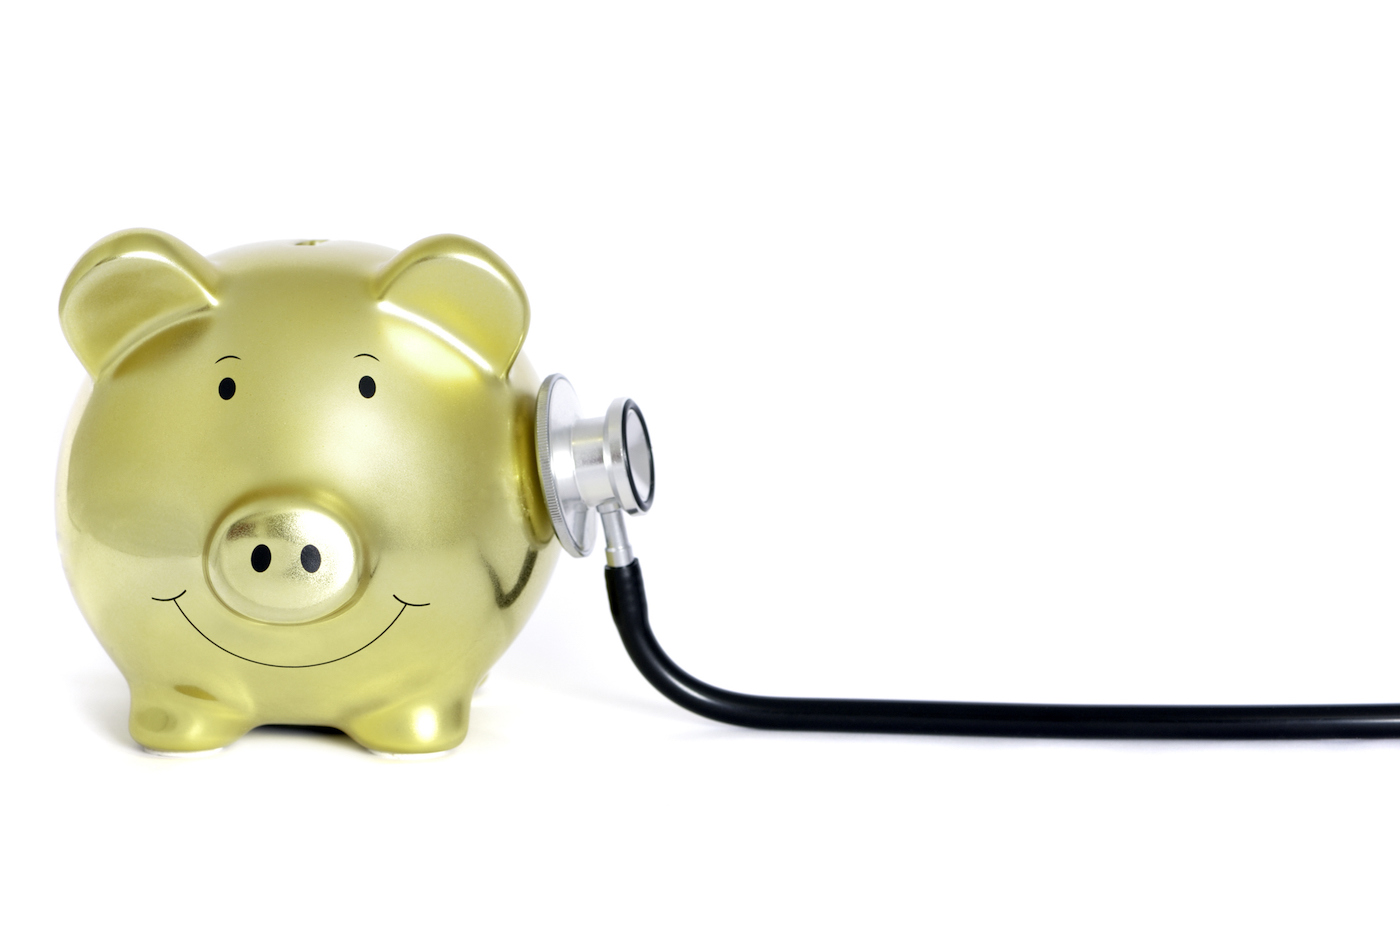 Conceptual image of a gold piggy bank and stethoscope isolated on pure white, selective focus on the piggy bank